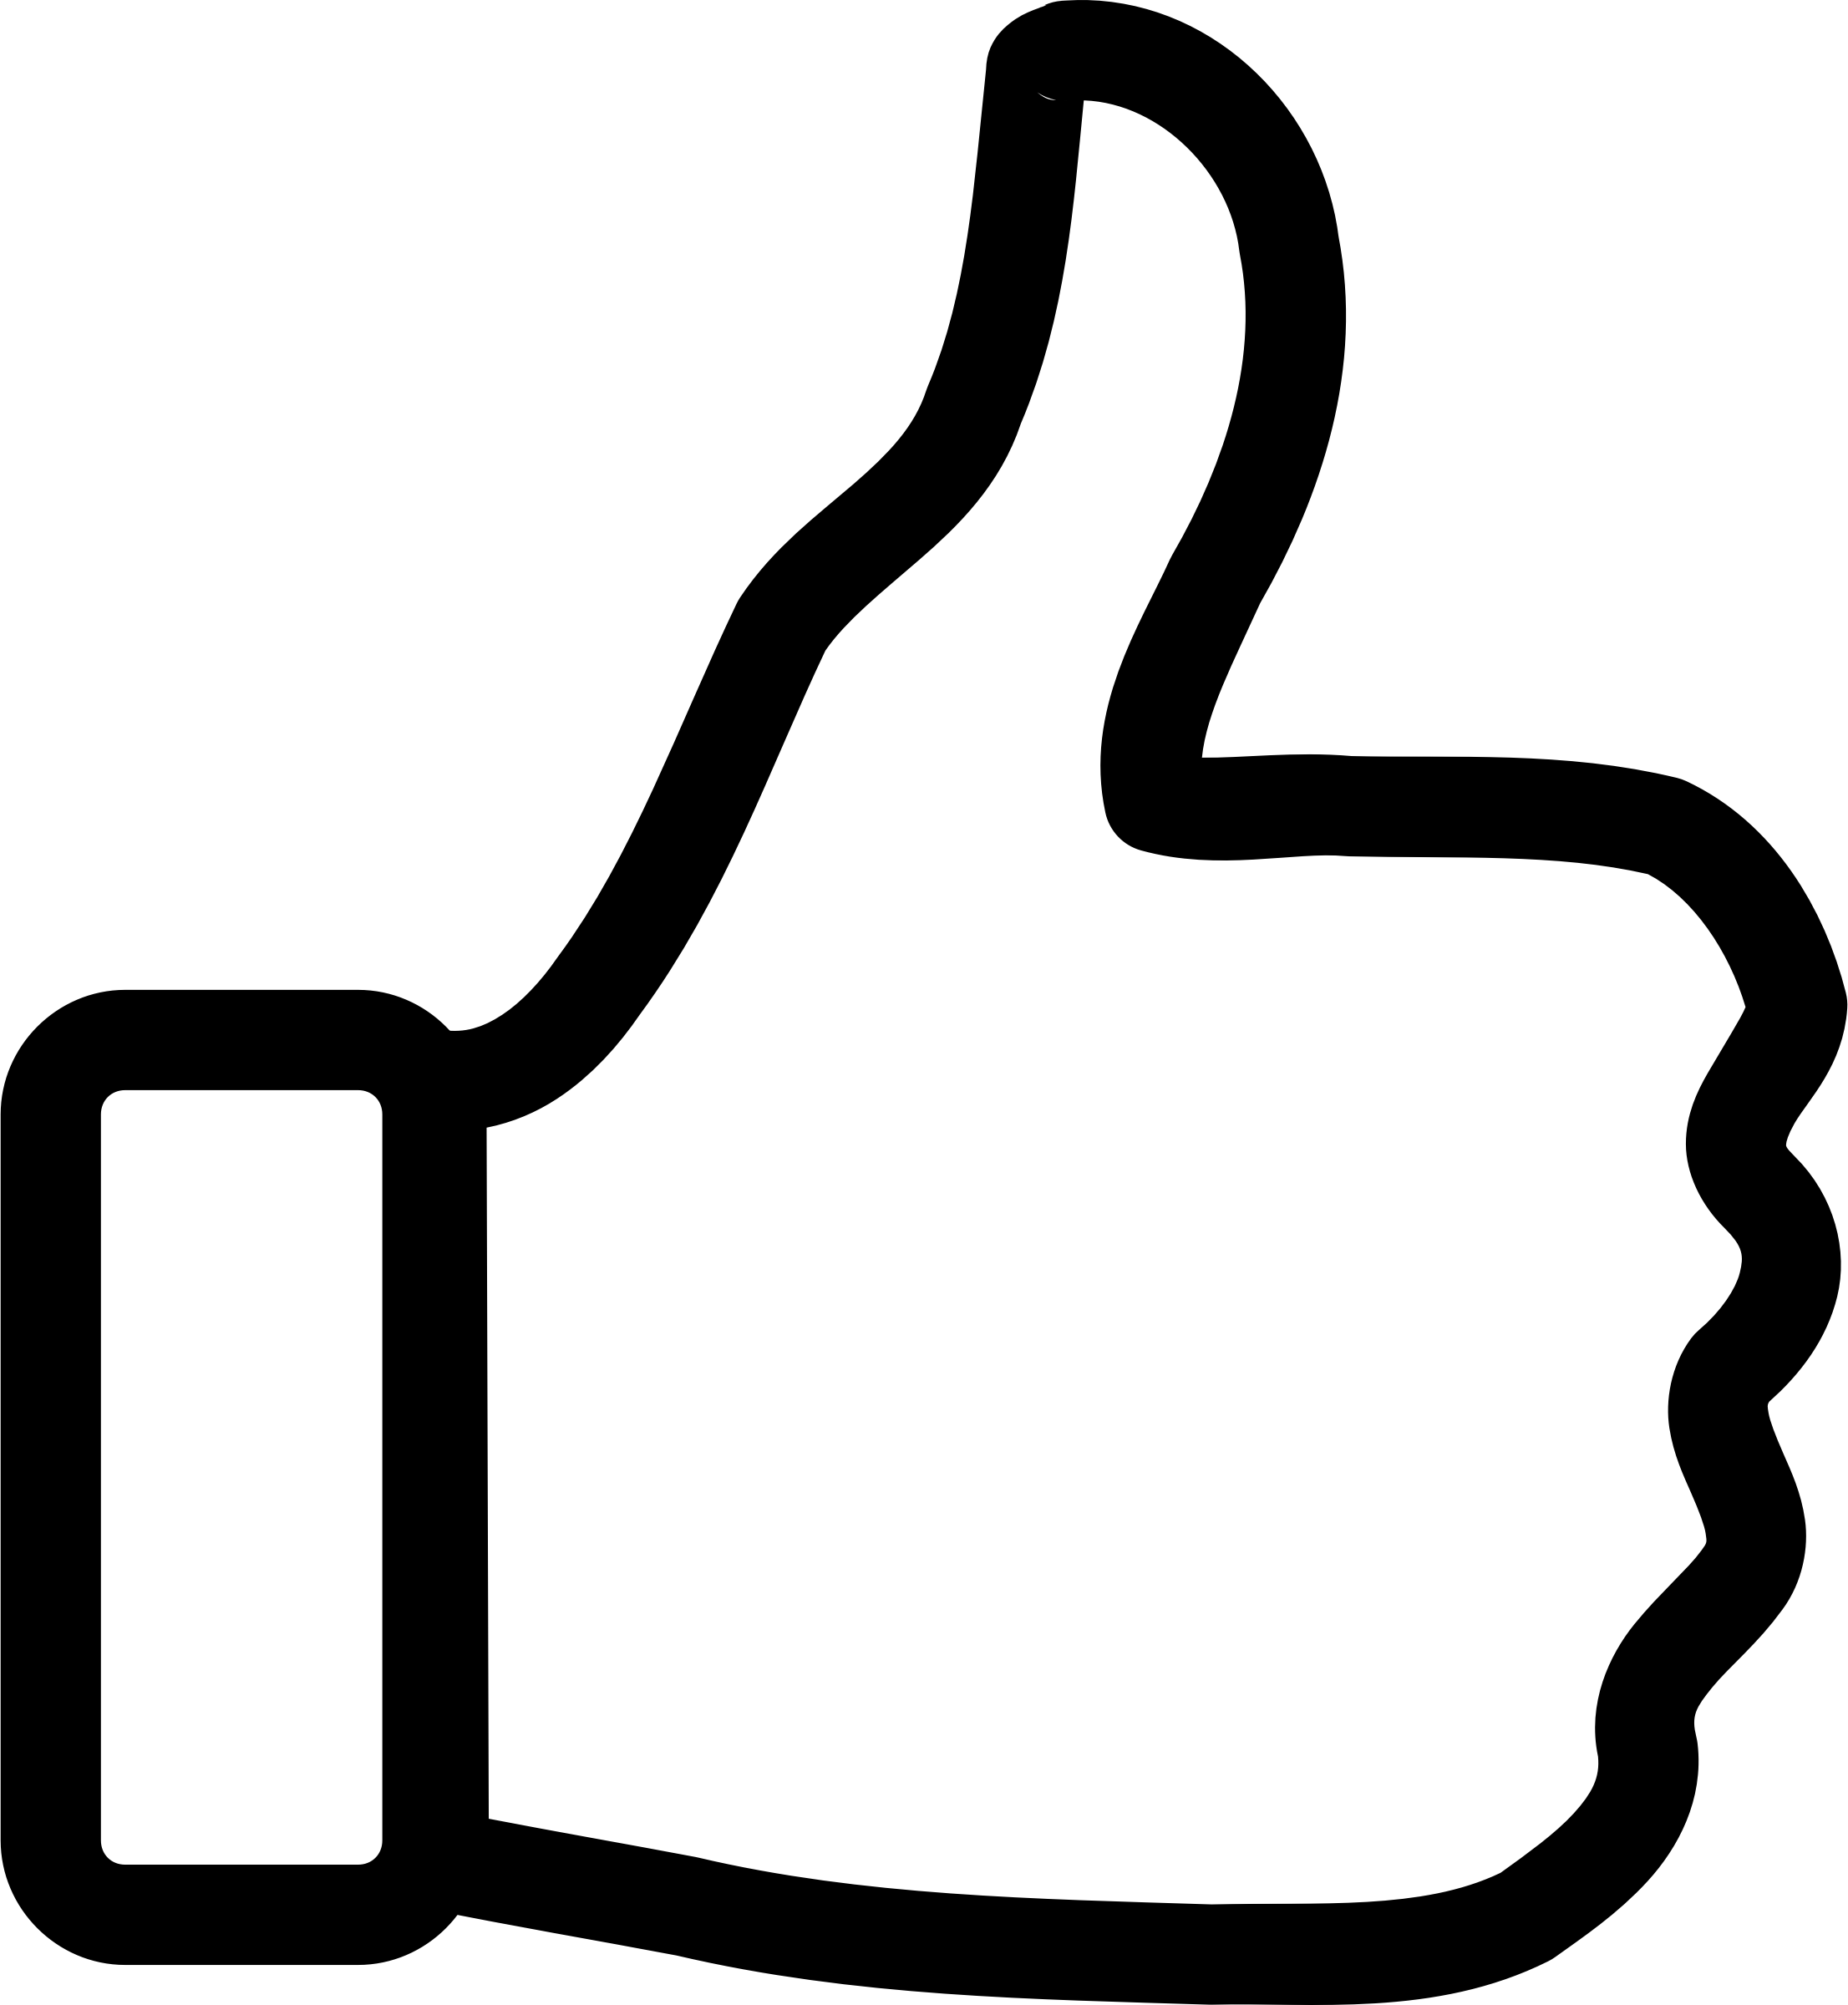 Enjoyable Inspiration Ideas Thumbs Up Image Outline - Thumbs Up Png (2212x2400)